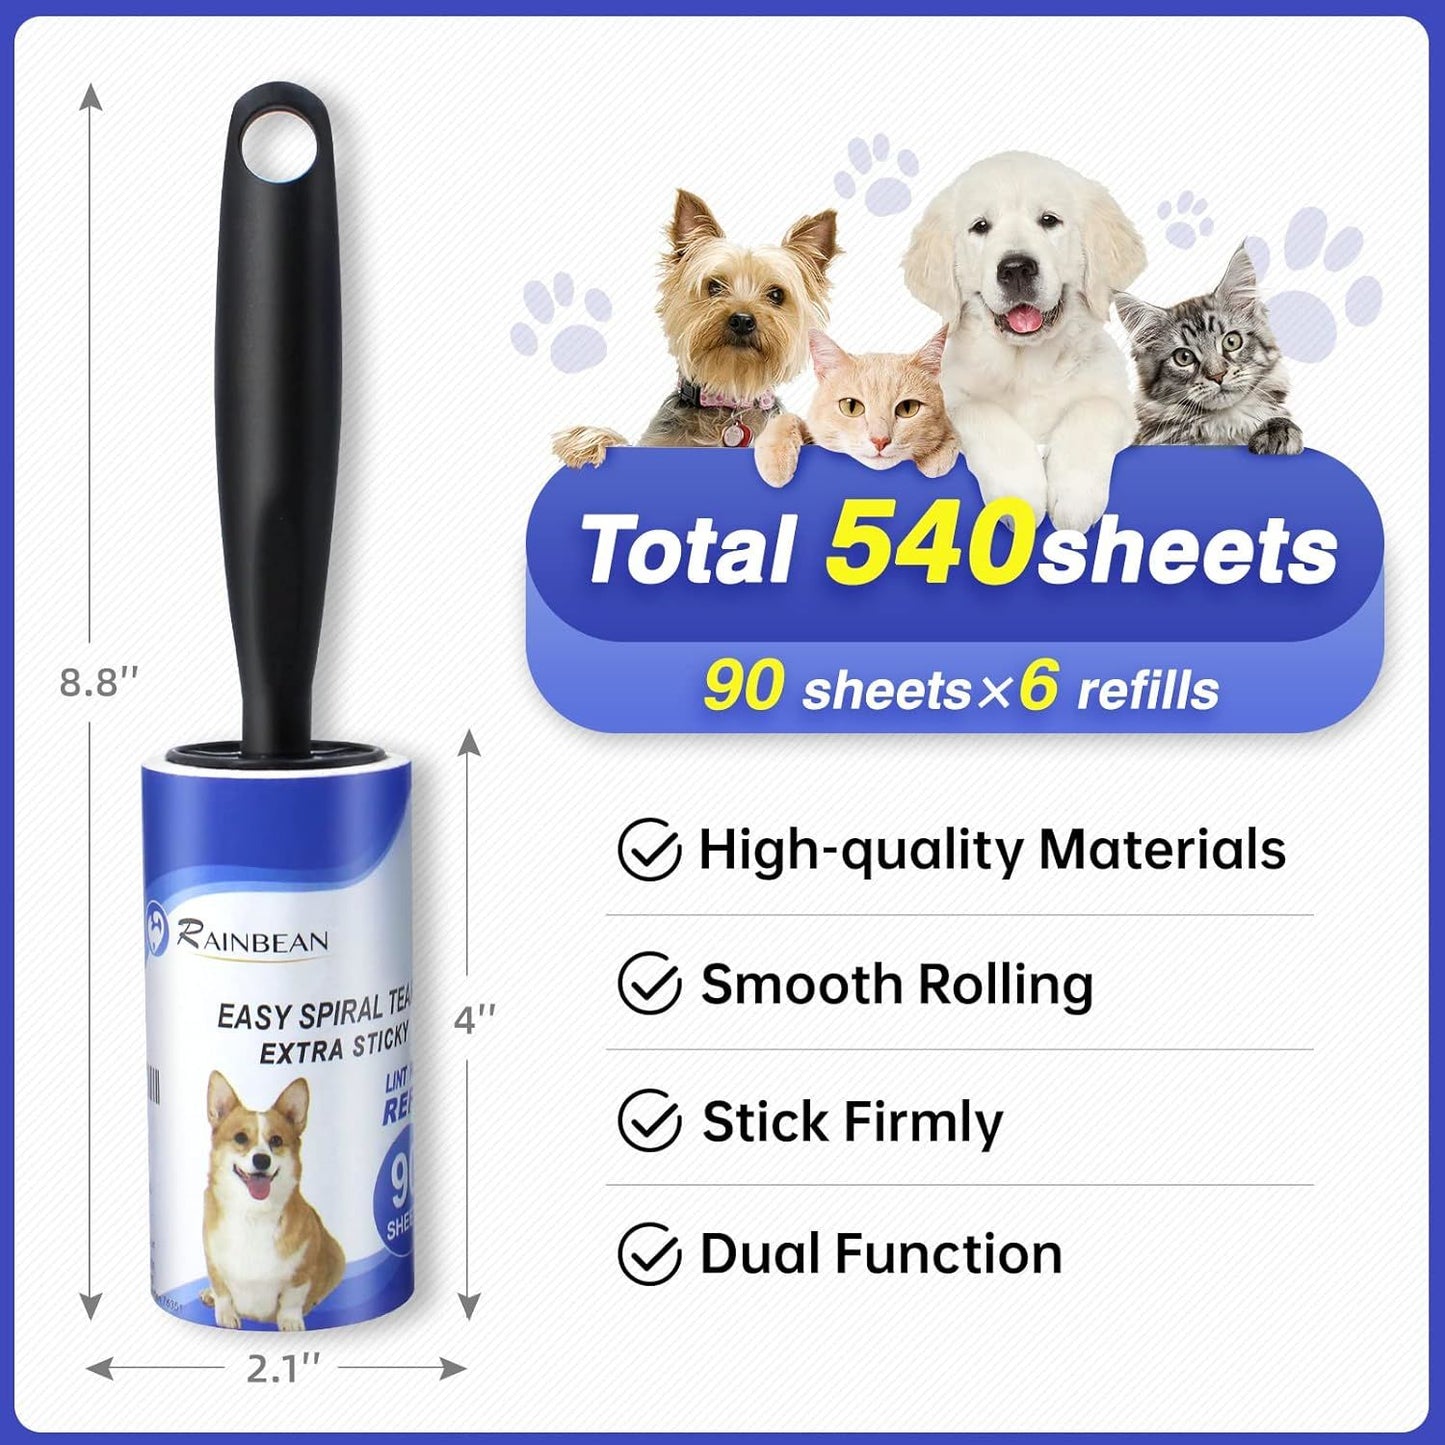 RAINBEAN Lint Rollers for Pet Hair Extra Sticky 540 Sheets 6 Refills Lint Roller with 2 Upgrade Handles, Portable Lint Remover Brush Pet Hair Remover for Dog & Cat Hair Removal, Clothes, Furniture